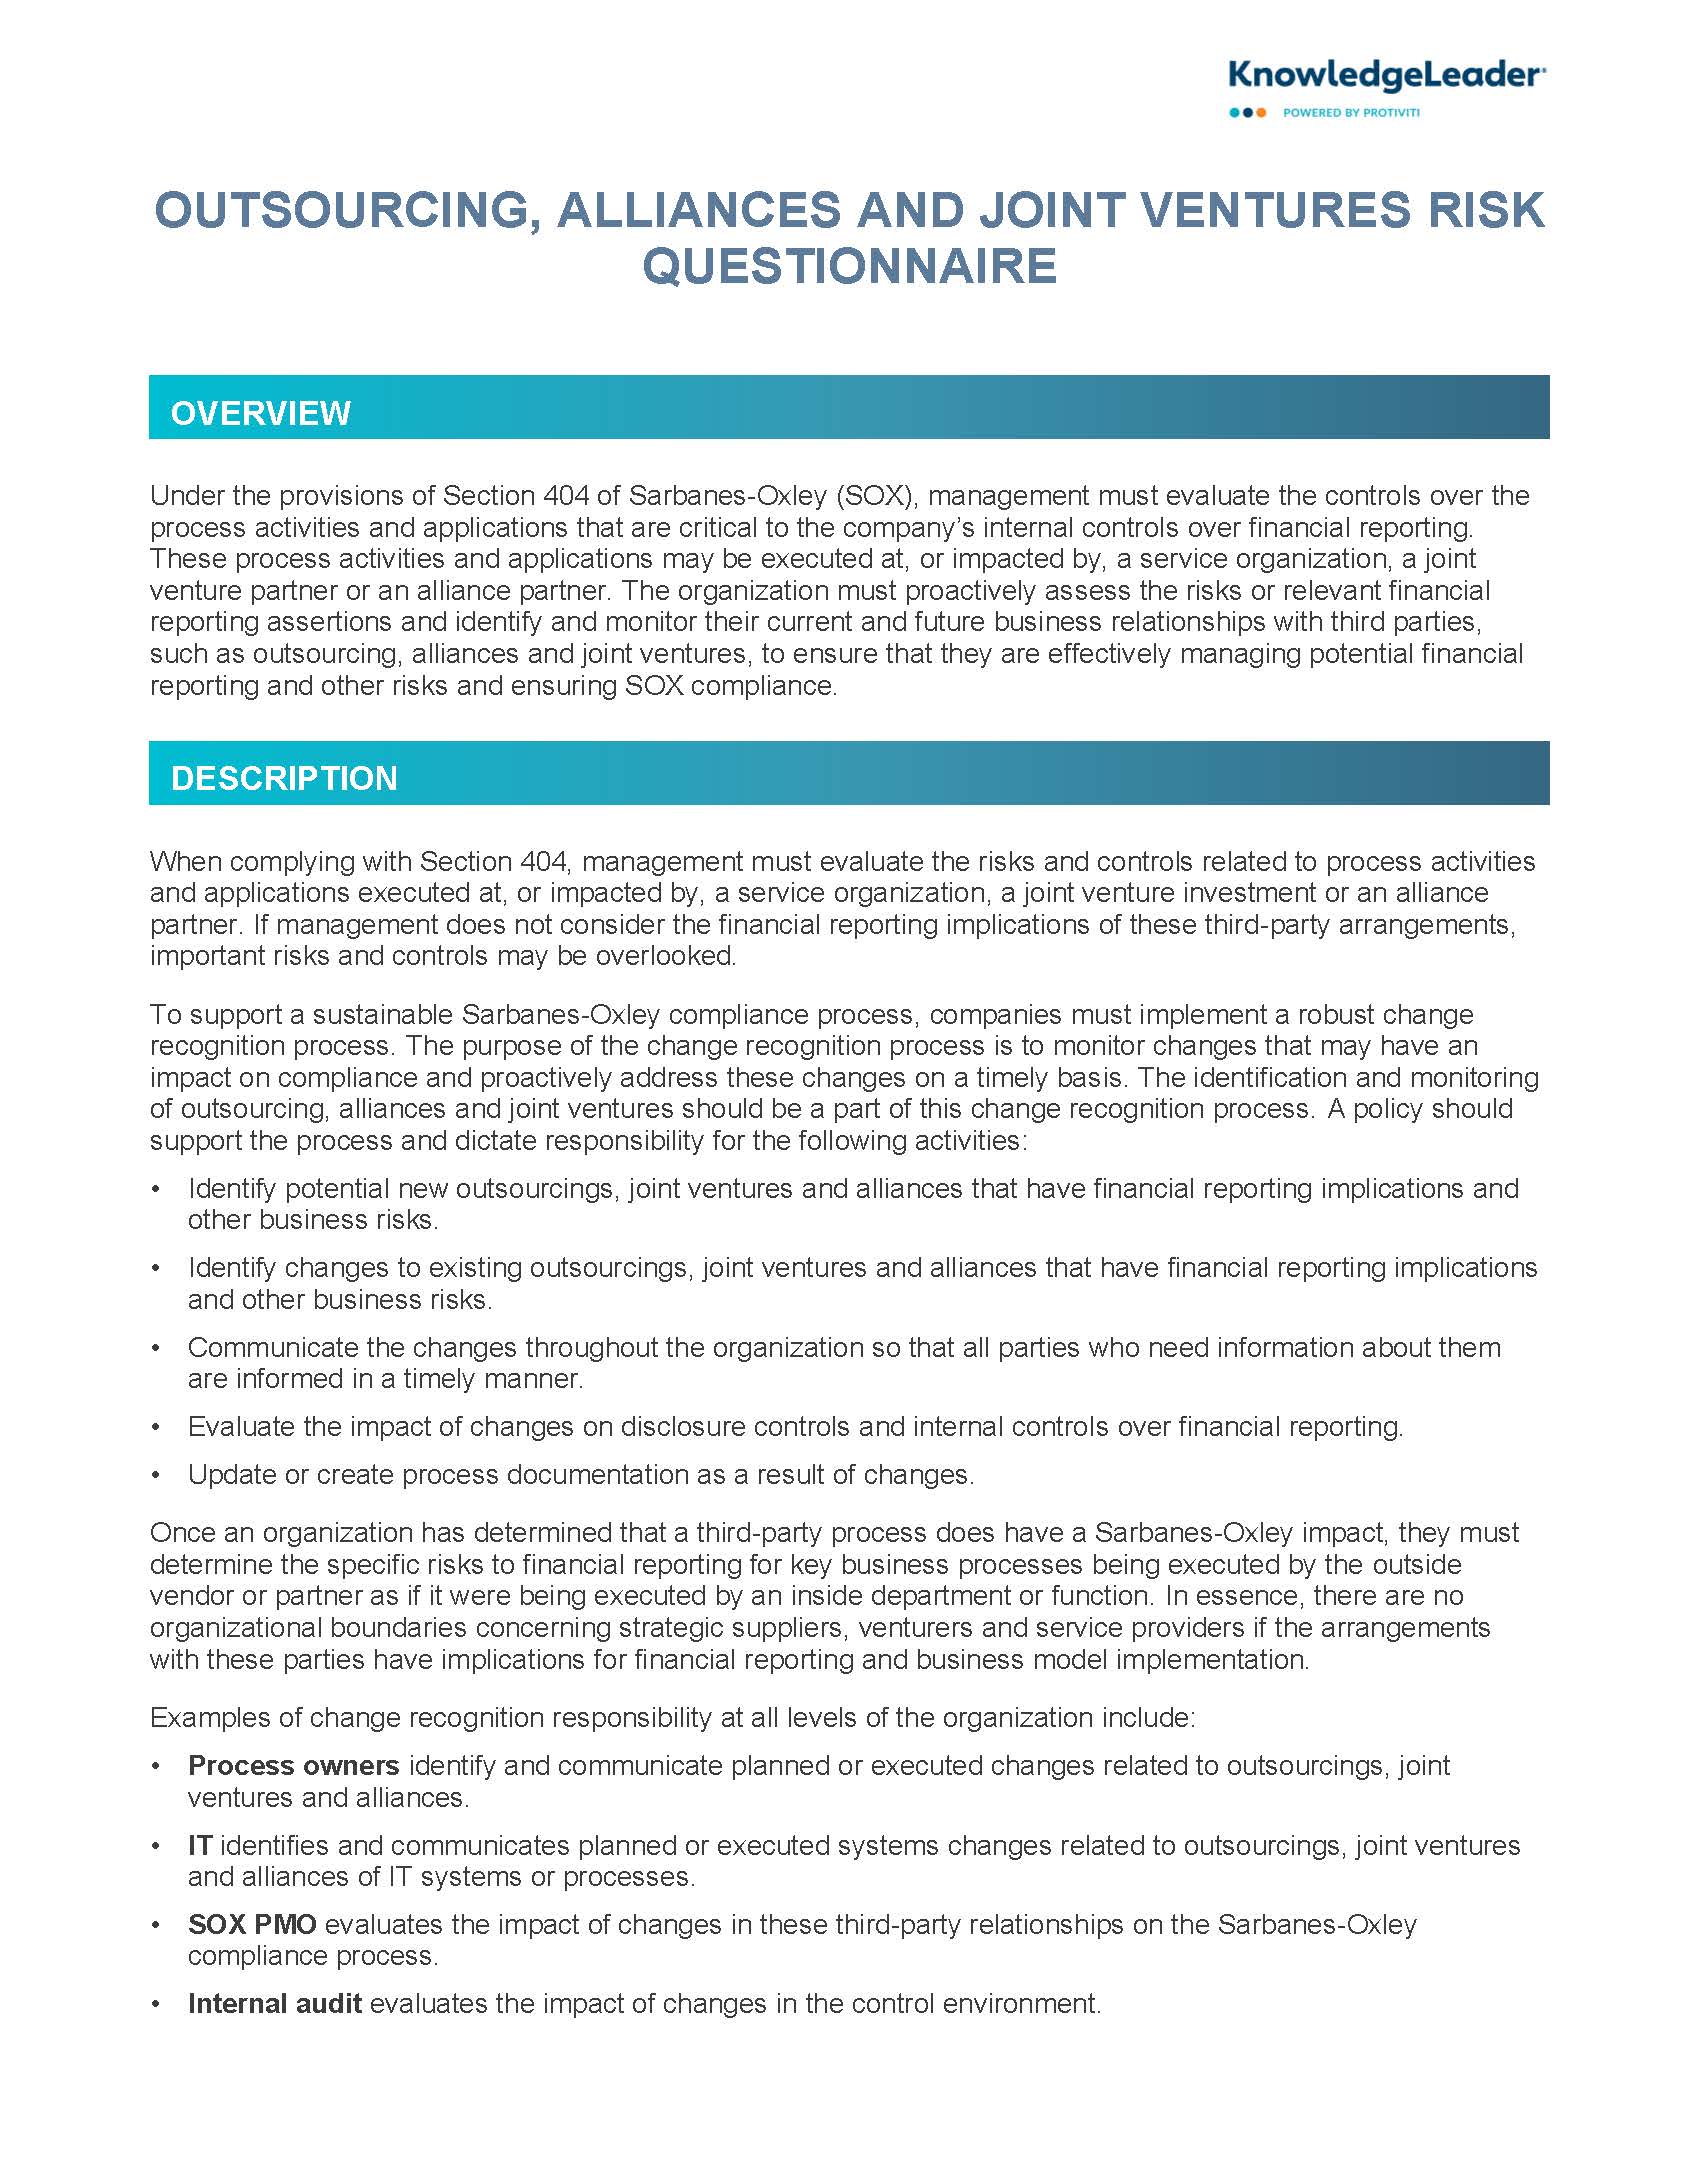 Screenshot of the first page of Outsourcing, Alliances and Joint Ventures Risk Questionnaire